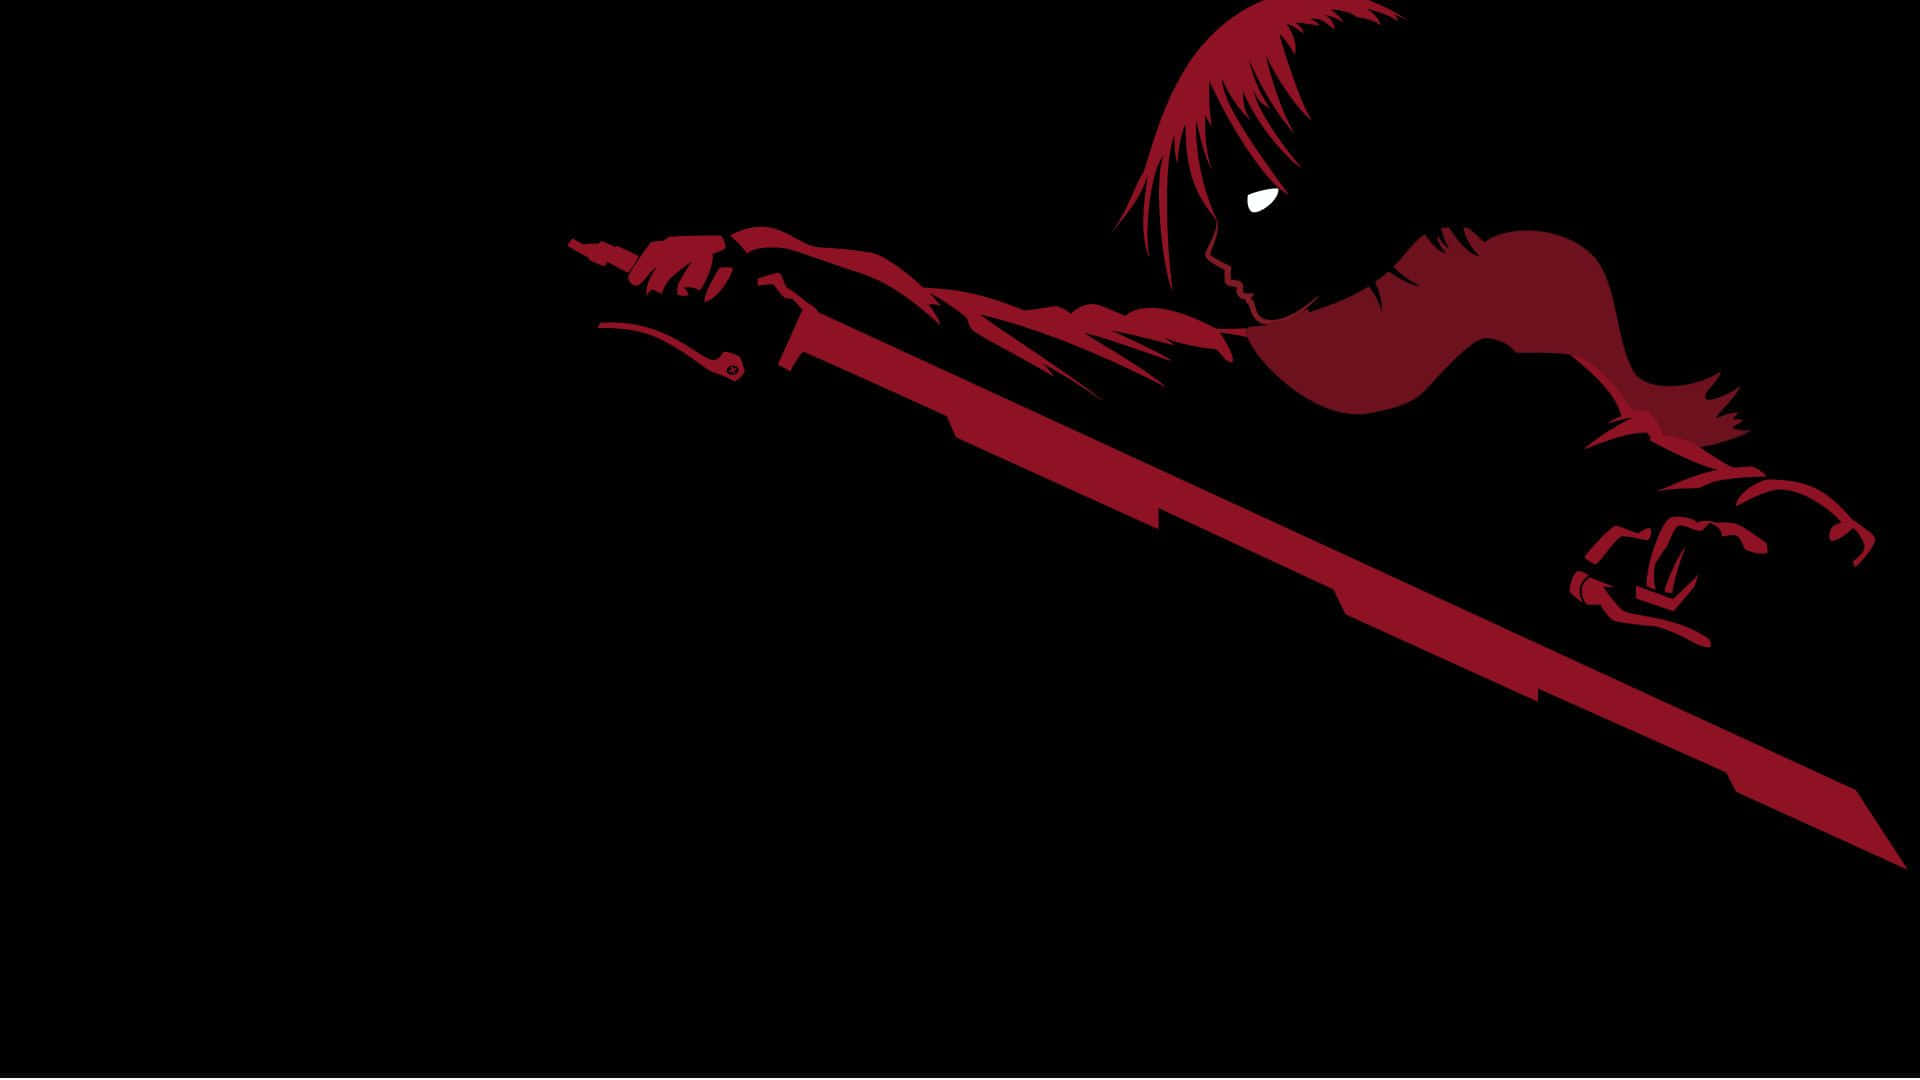 15+ Red Anime Wallpapers for iPhone and Android by William Russell